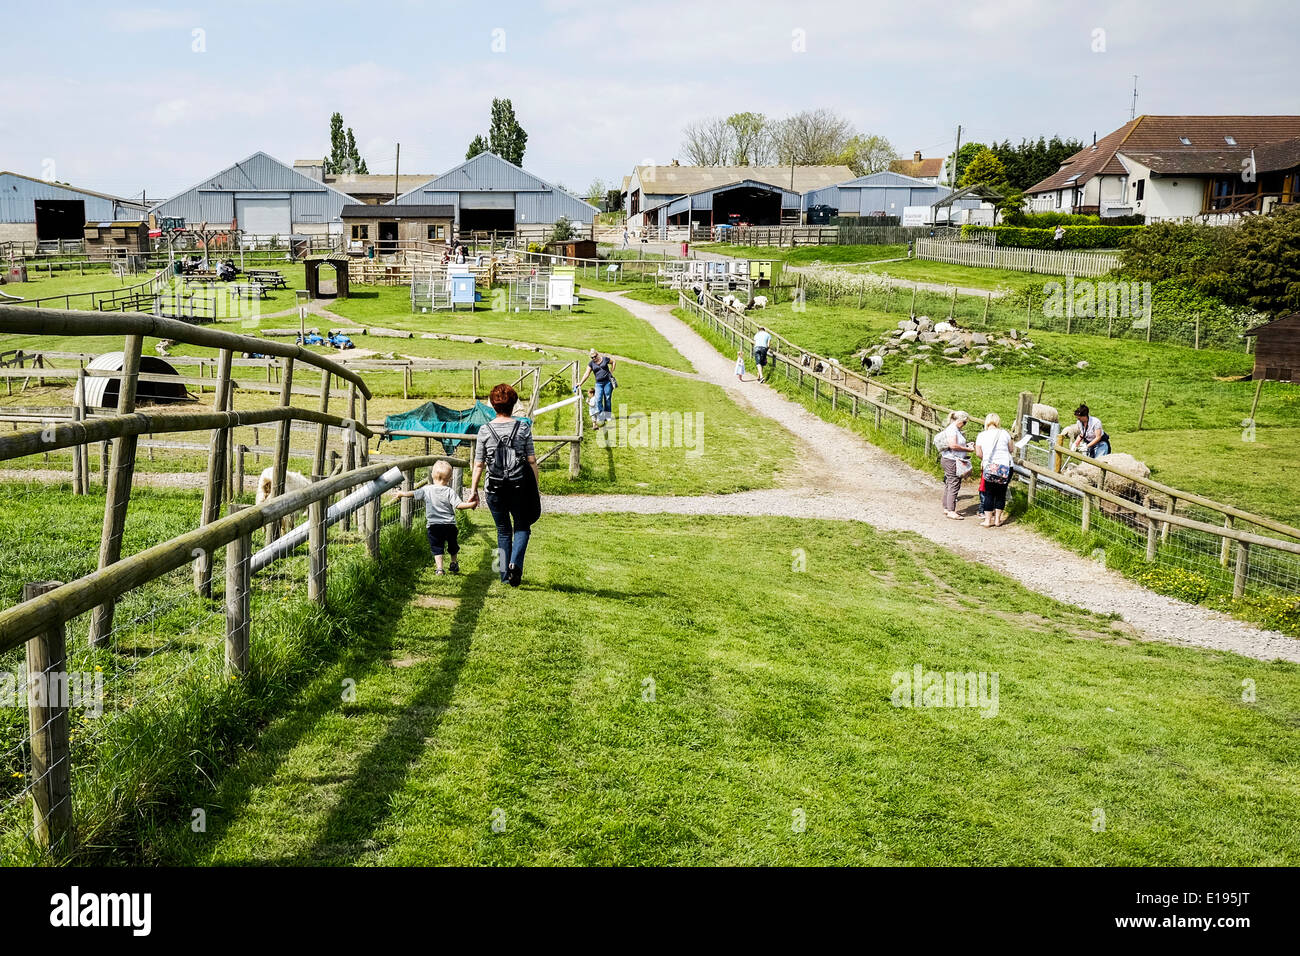 The Hadleigh Childrens Farm in Essex. Stock Photo